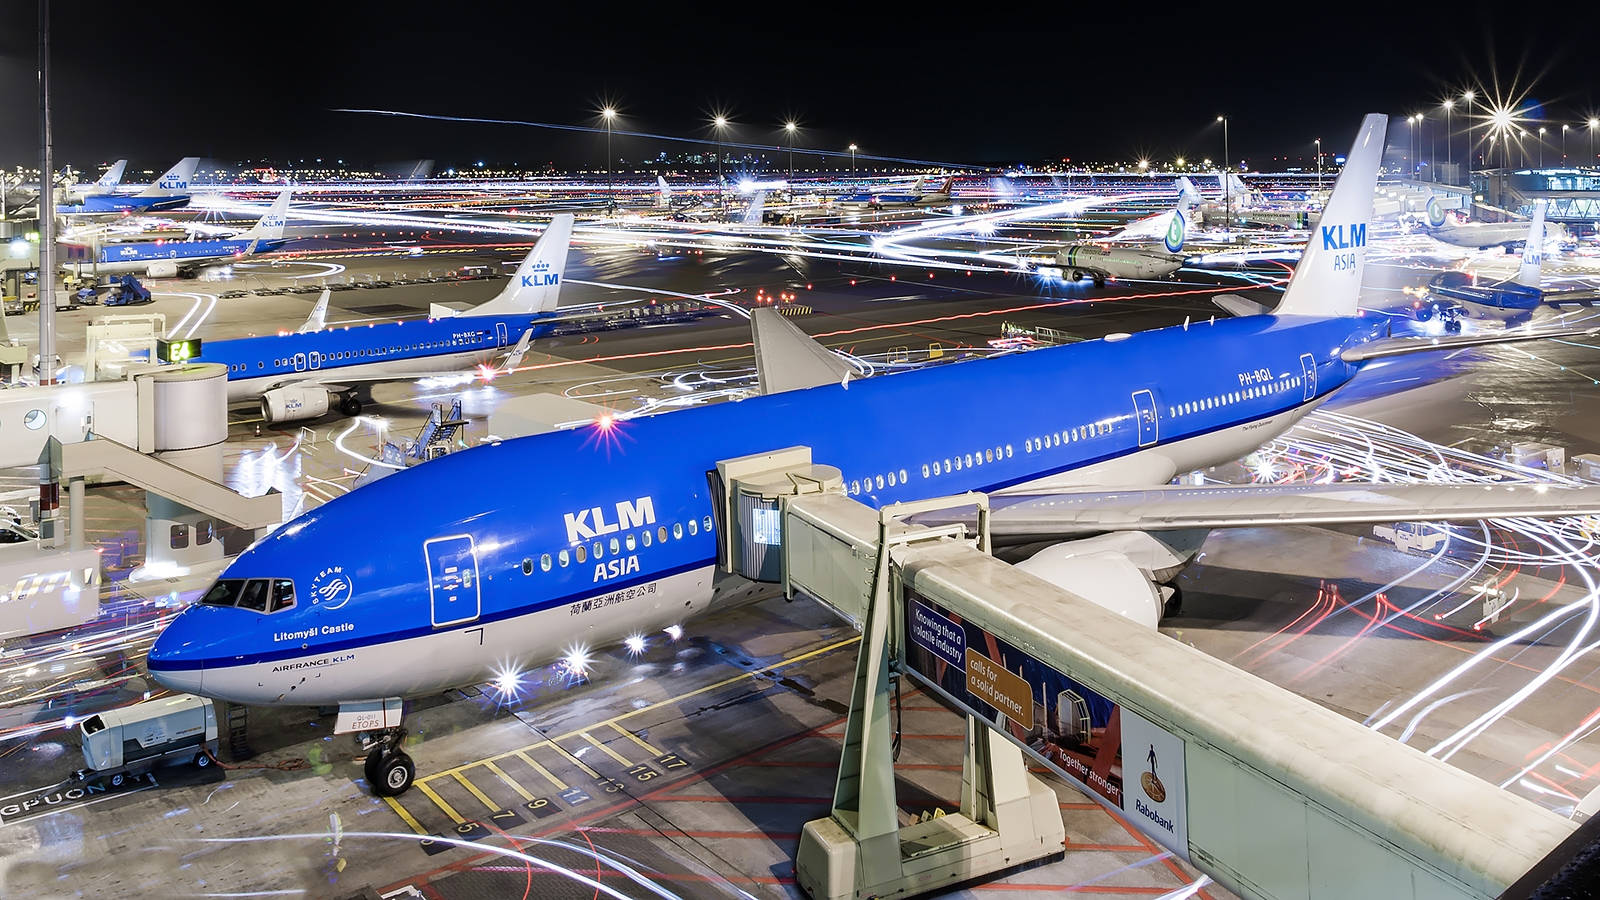 Long Exposure Photography Of Klm Planes Background